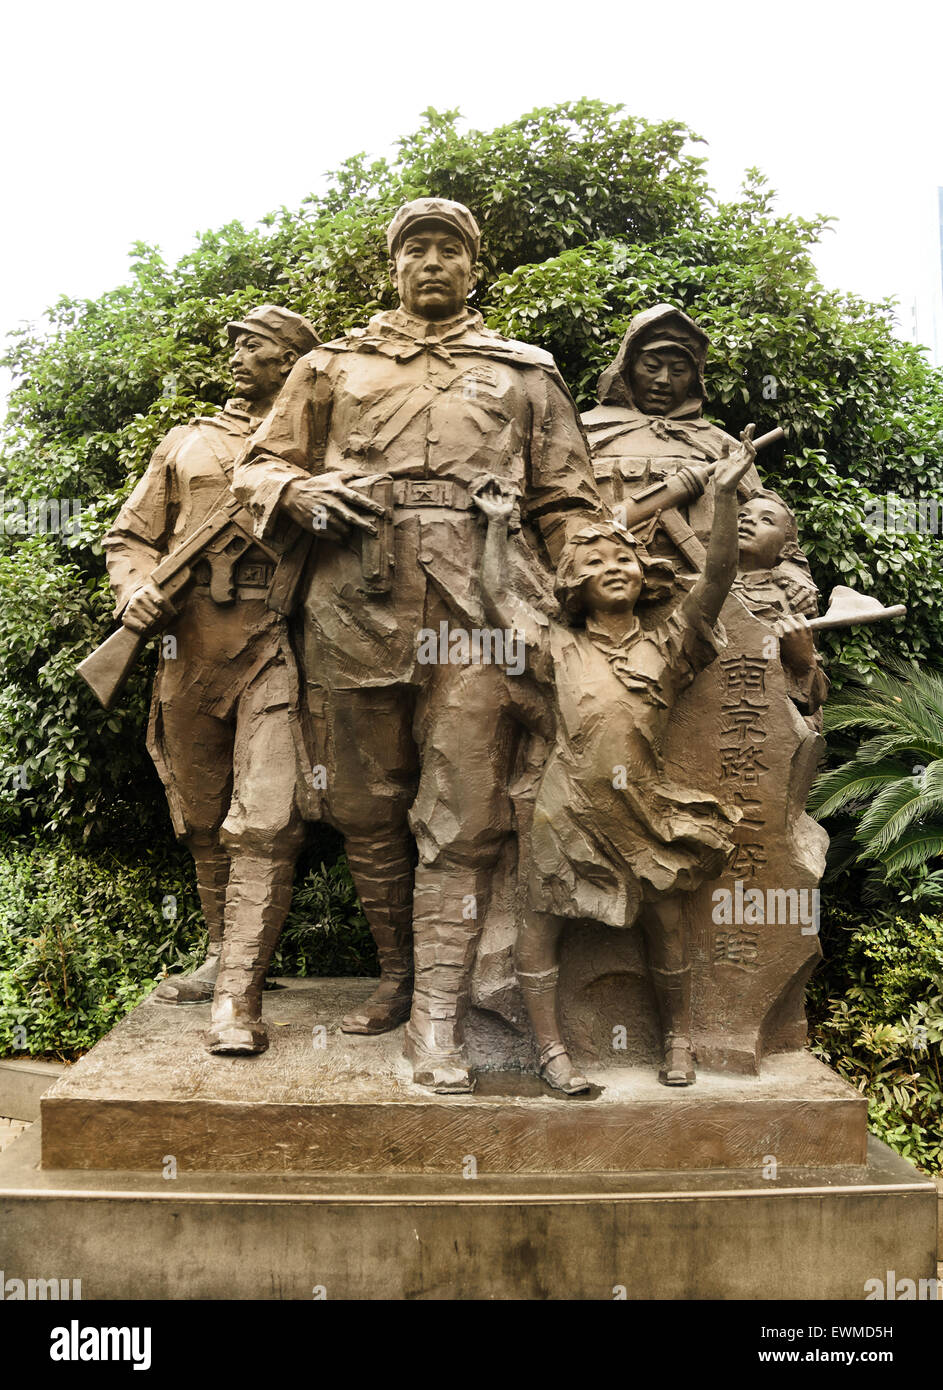 Statue of Chinese Communist Party People’s Park Shangha ( People's Liberation Army soldiers and two young children intended to glorify the achievements of the Communist Party of China ) Stock Photo